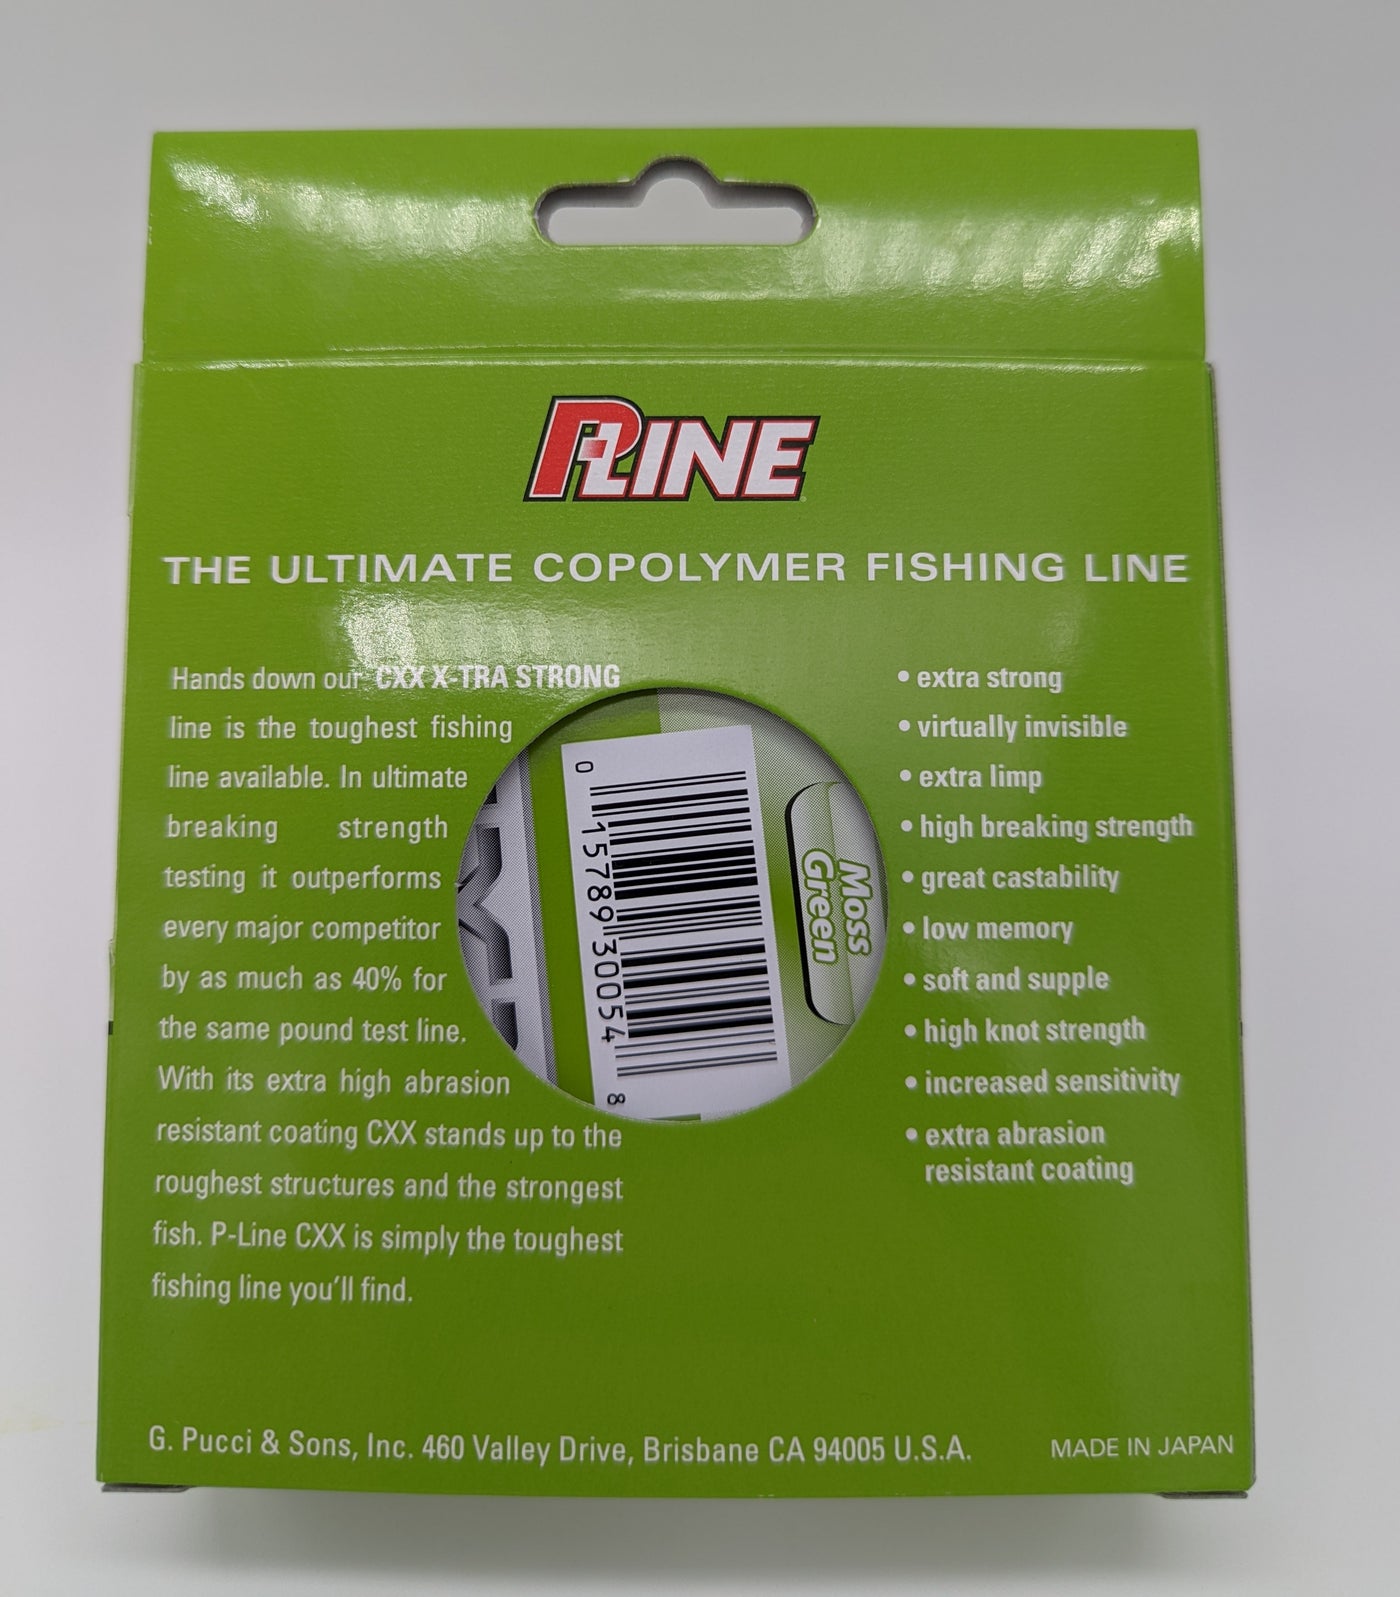 P-Line Fishing Line in Fishing Tackle